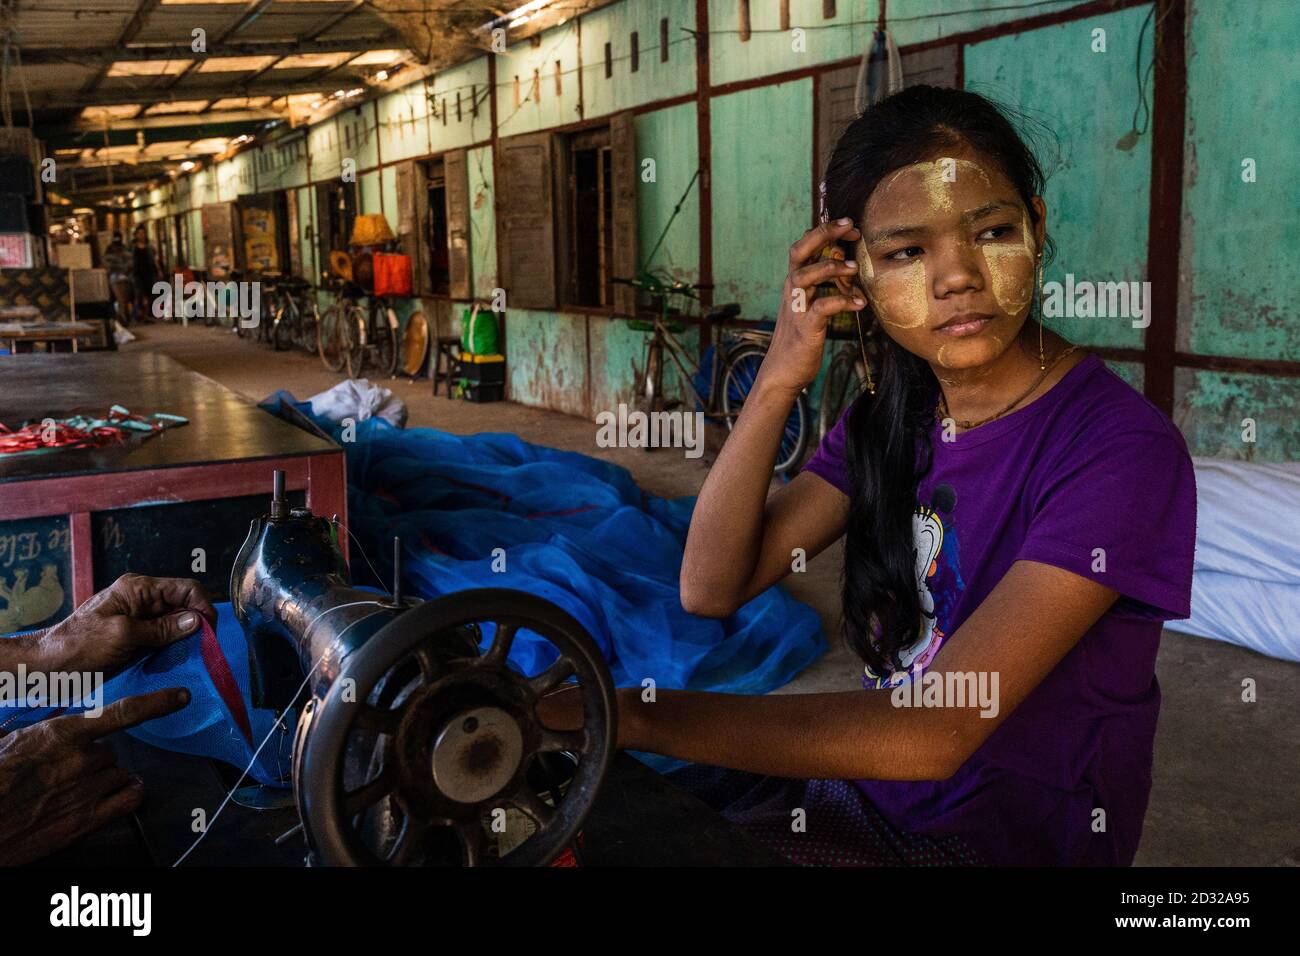 Burmese girl working on sewing in the local market Stock Photo